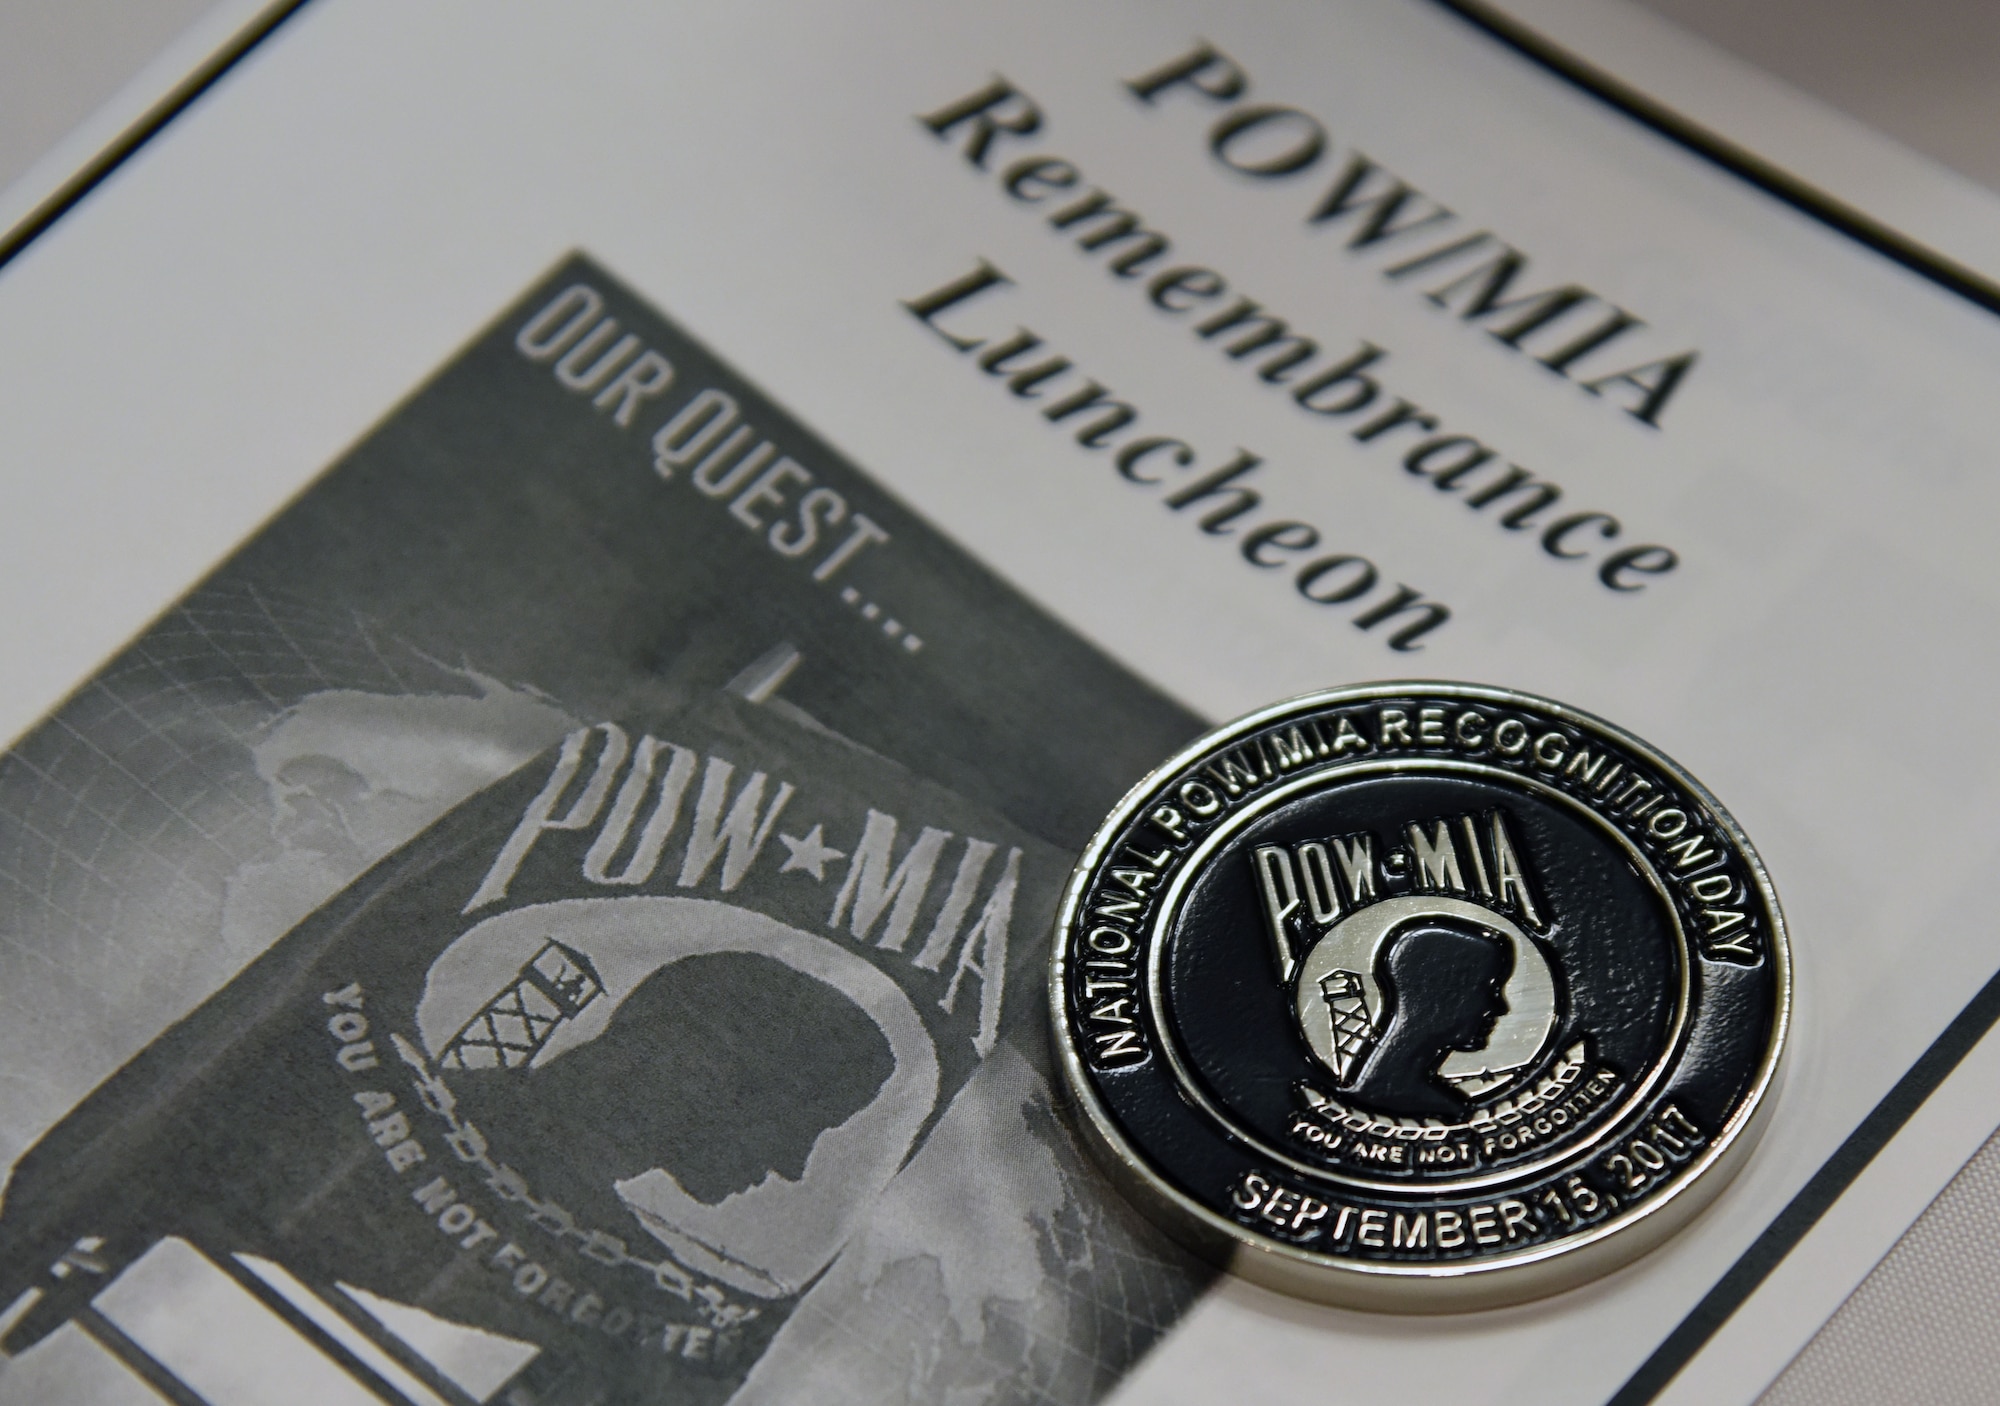 A commemorative coin and event pamphlet is on display during a POW/MIA Remembrance Luncheon at the Bay Breeze Event Center Sept. 13, 2017, on Keesler Air Force Base, Mississippi. The event, hosted by the Air Force Sergeants Association, was held to raise awareness and pay tribute to all prisoners of war and military members still missing in action. (U.S. Air Force photo by Kemberly Groue)